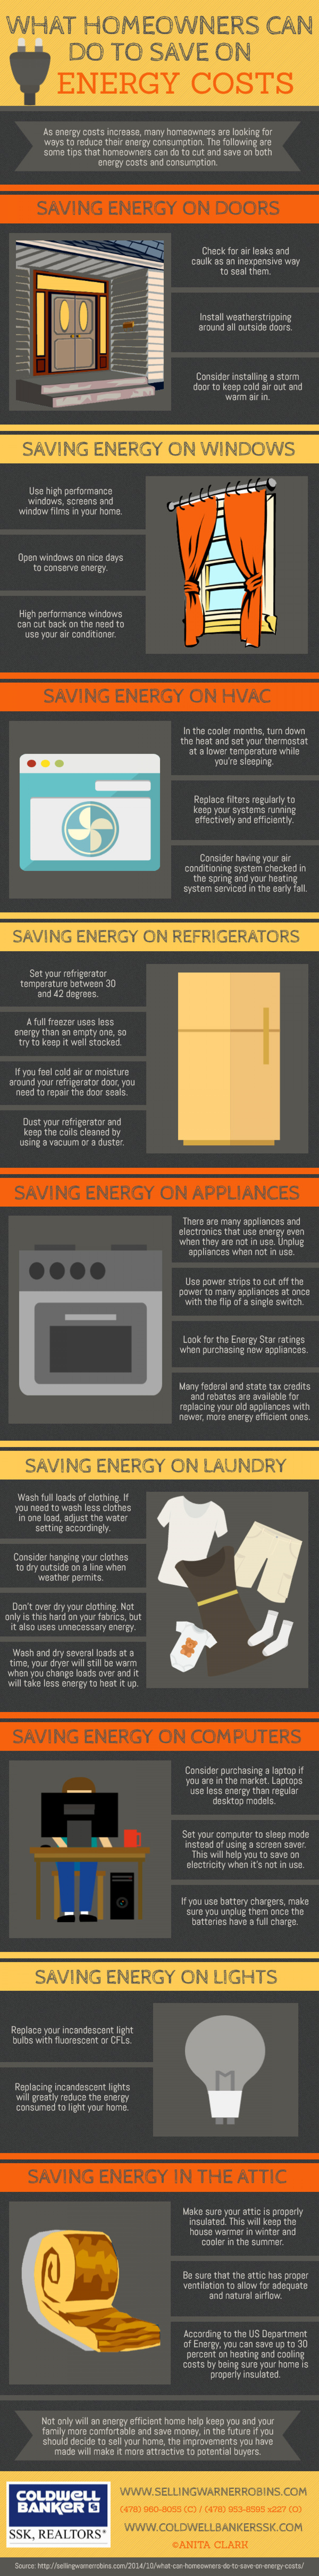 What Homeowners Can Do to Save Money on Energy Costs  Infographic